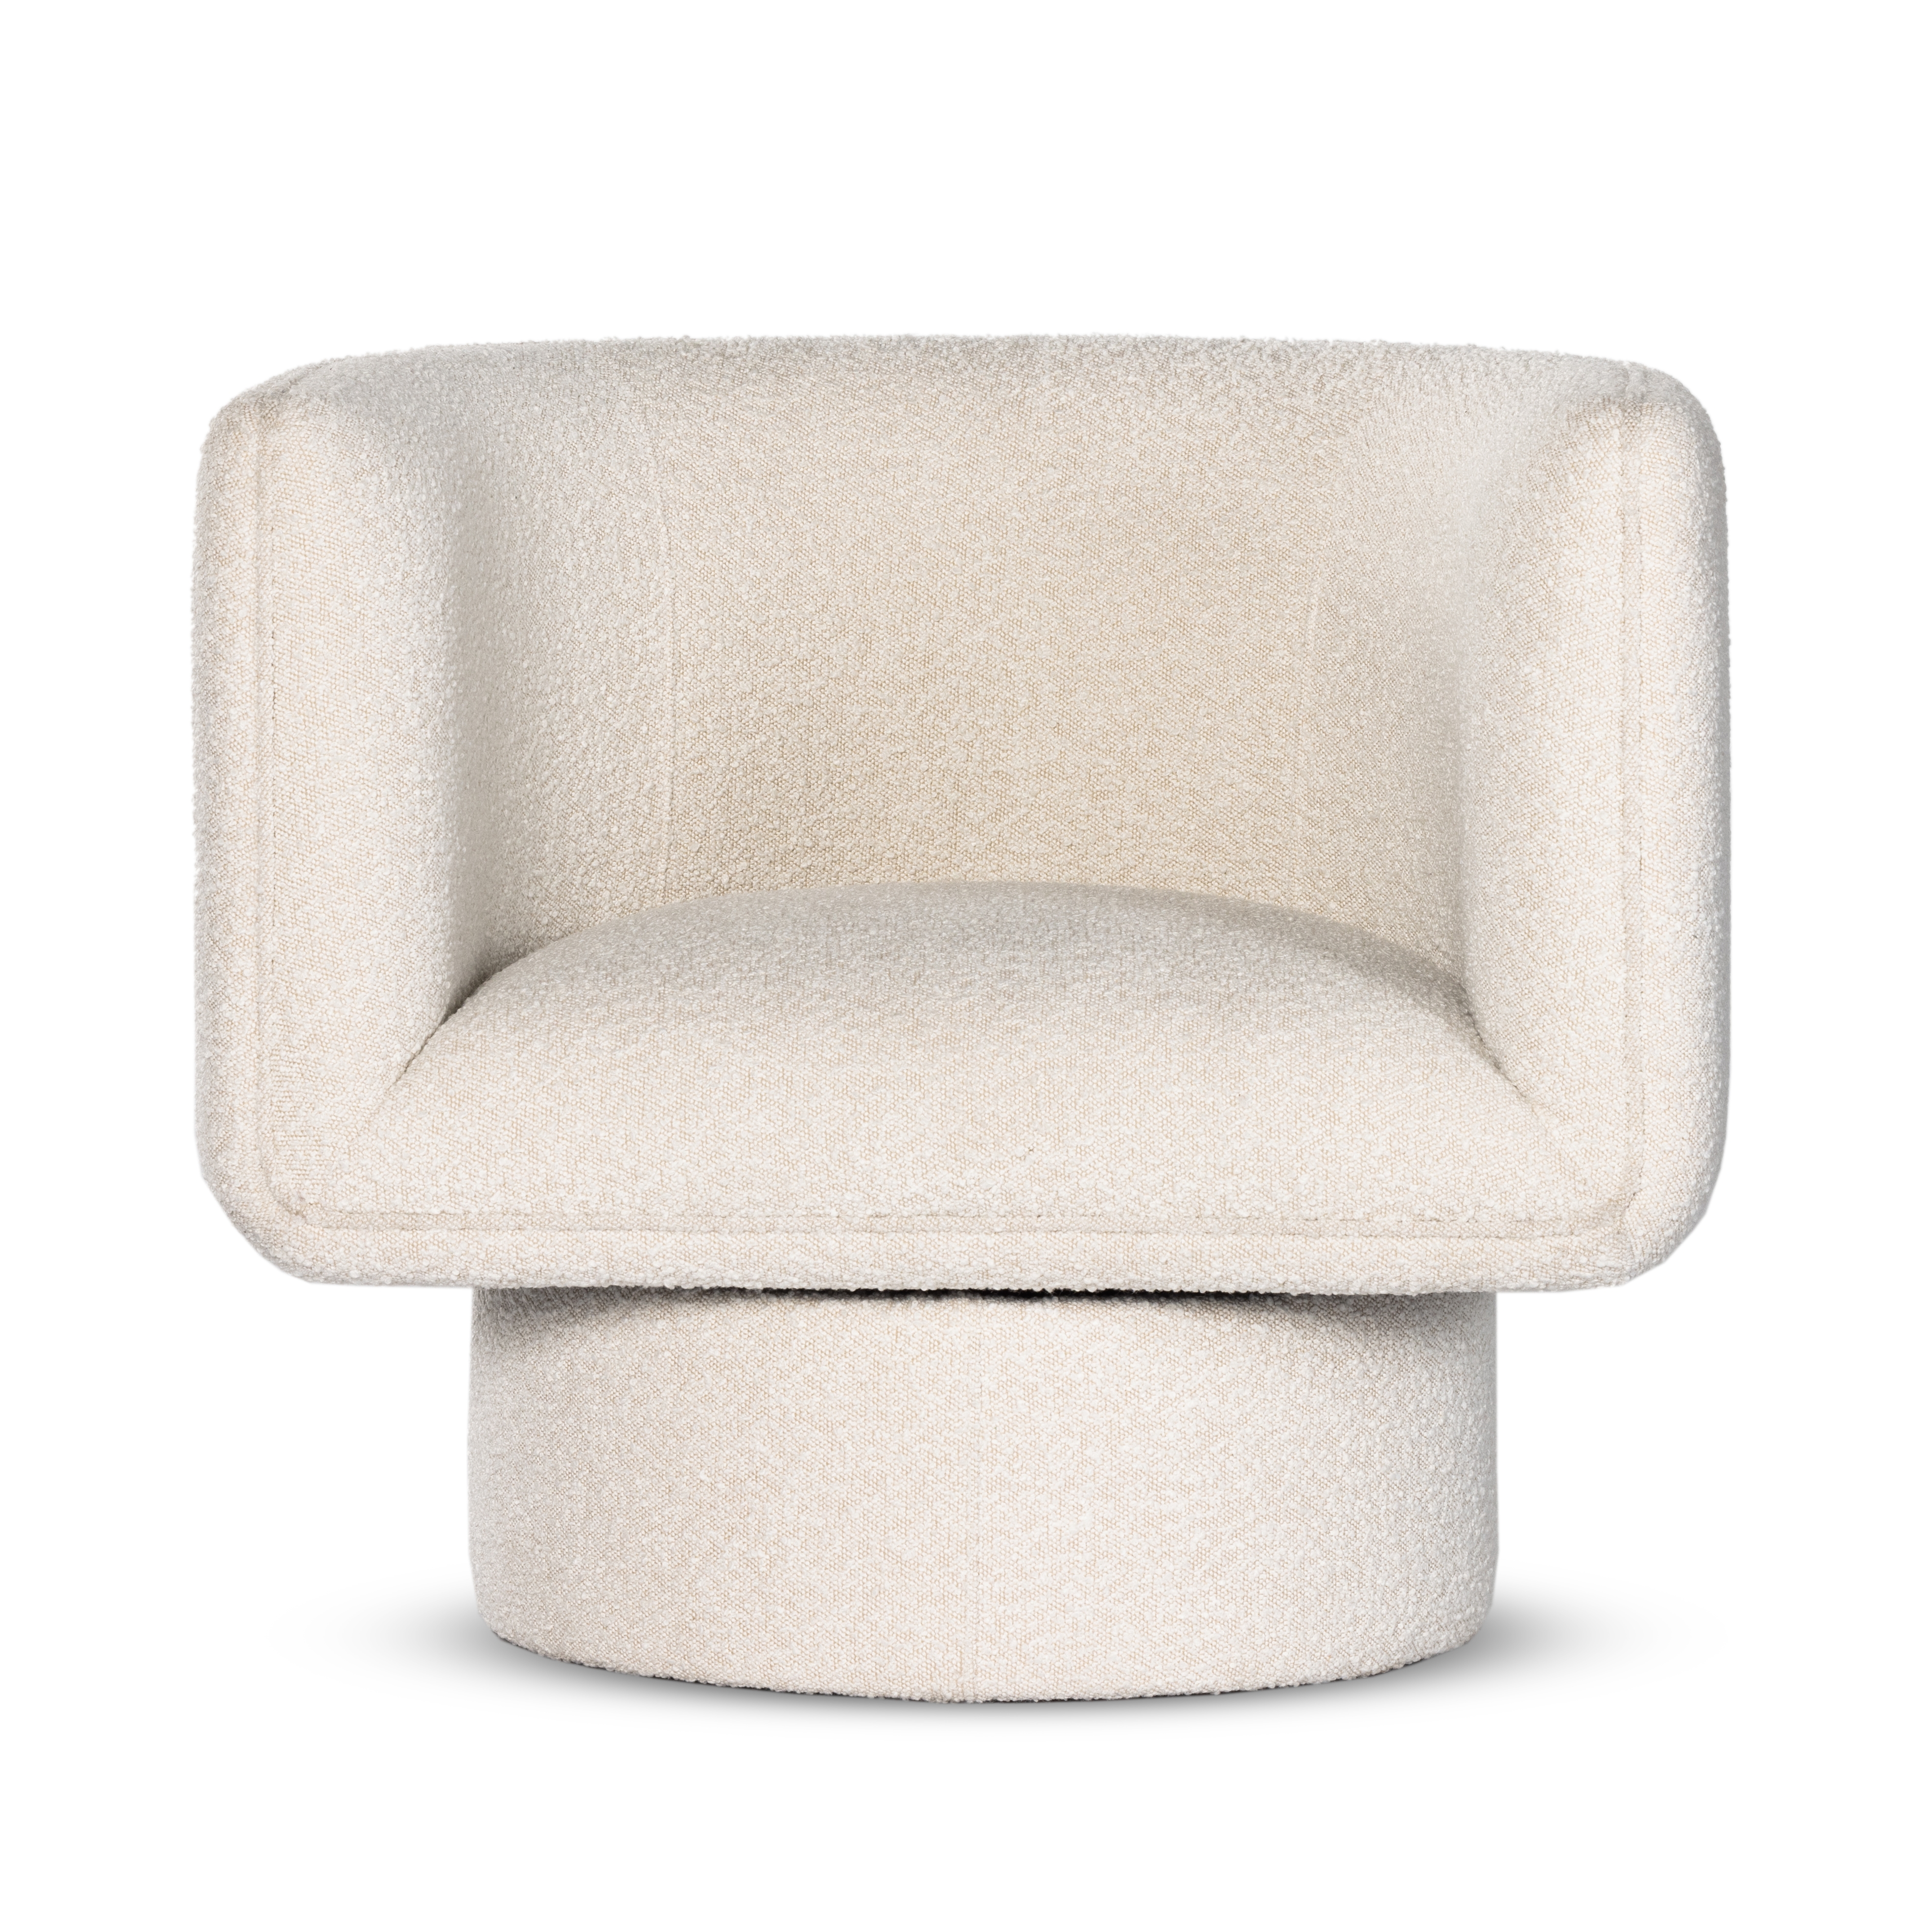 Adriel Swivel Chair-Knoll Natural - Image 3